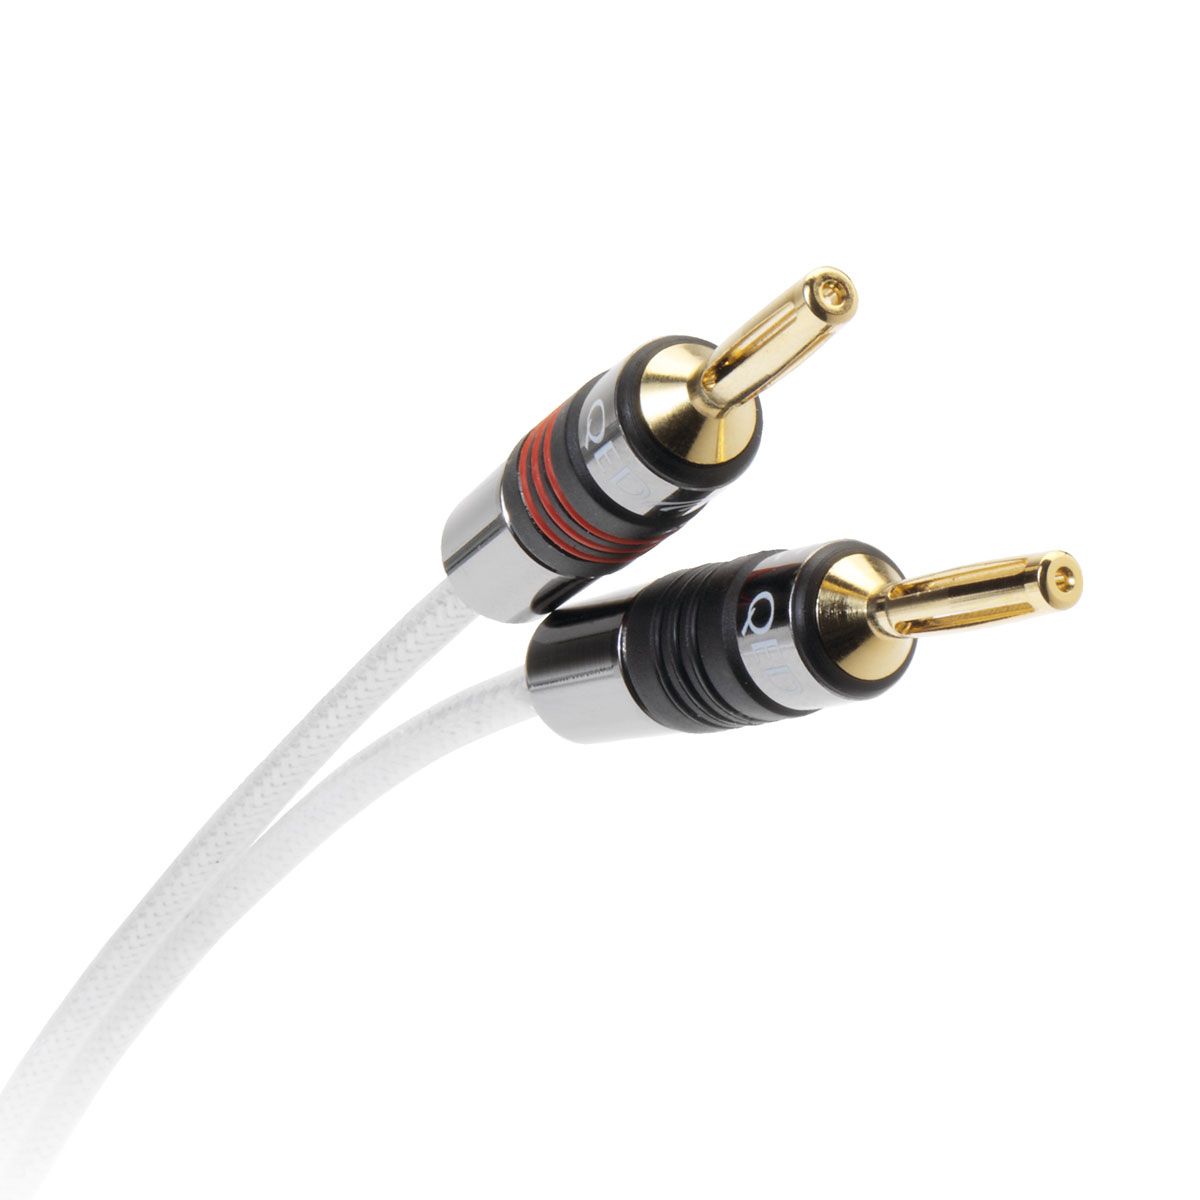 QED c-qst/100 Silver Anniversary XT Speaker Cable - 100 Meters